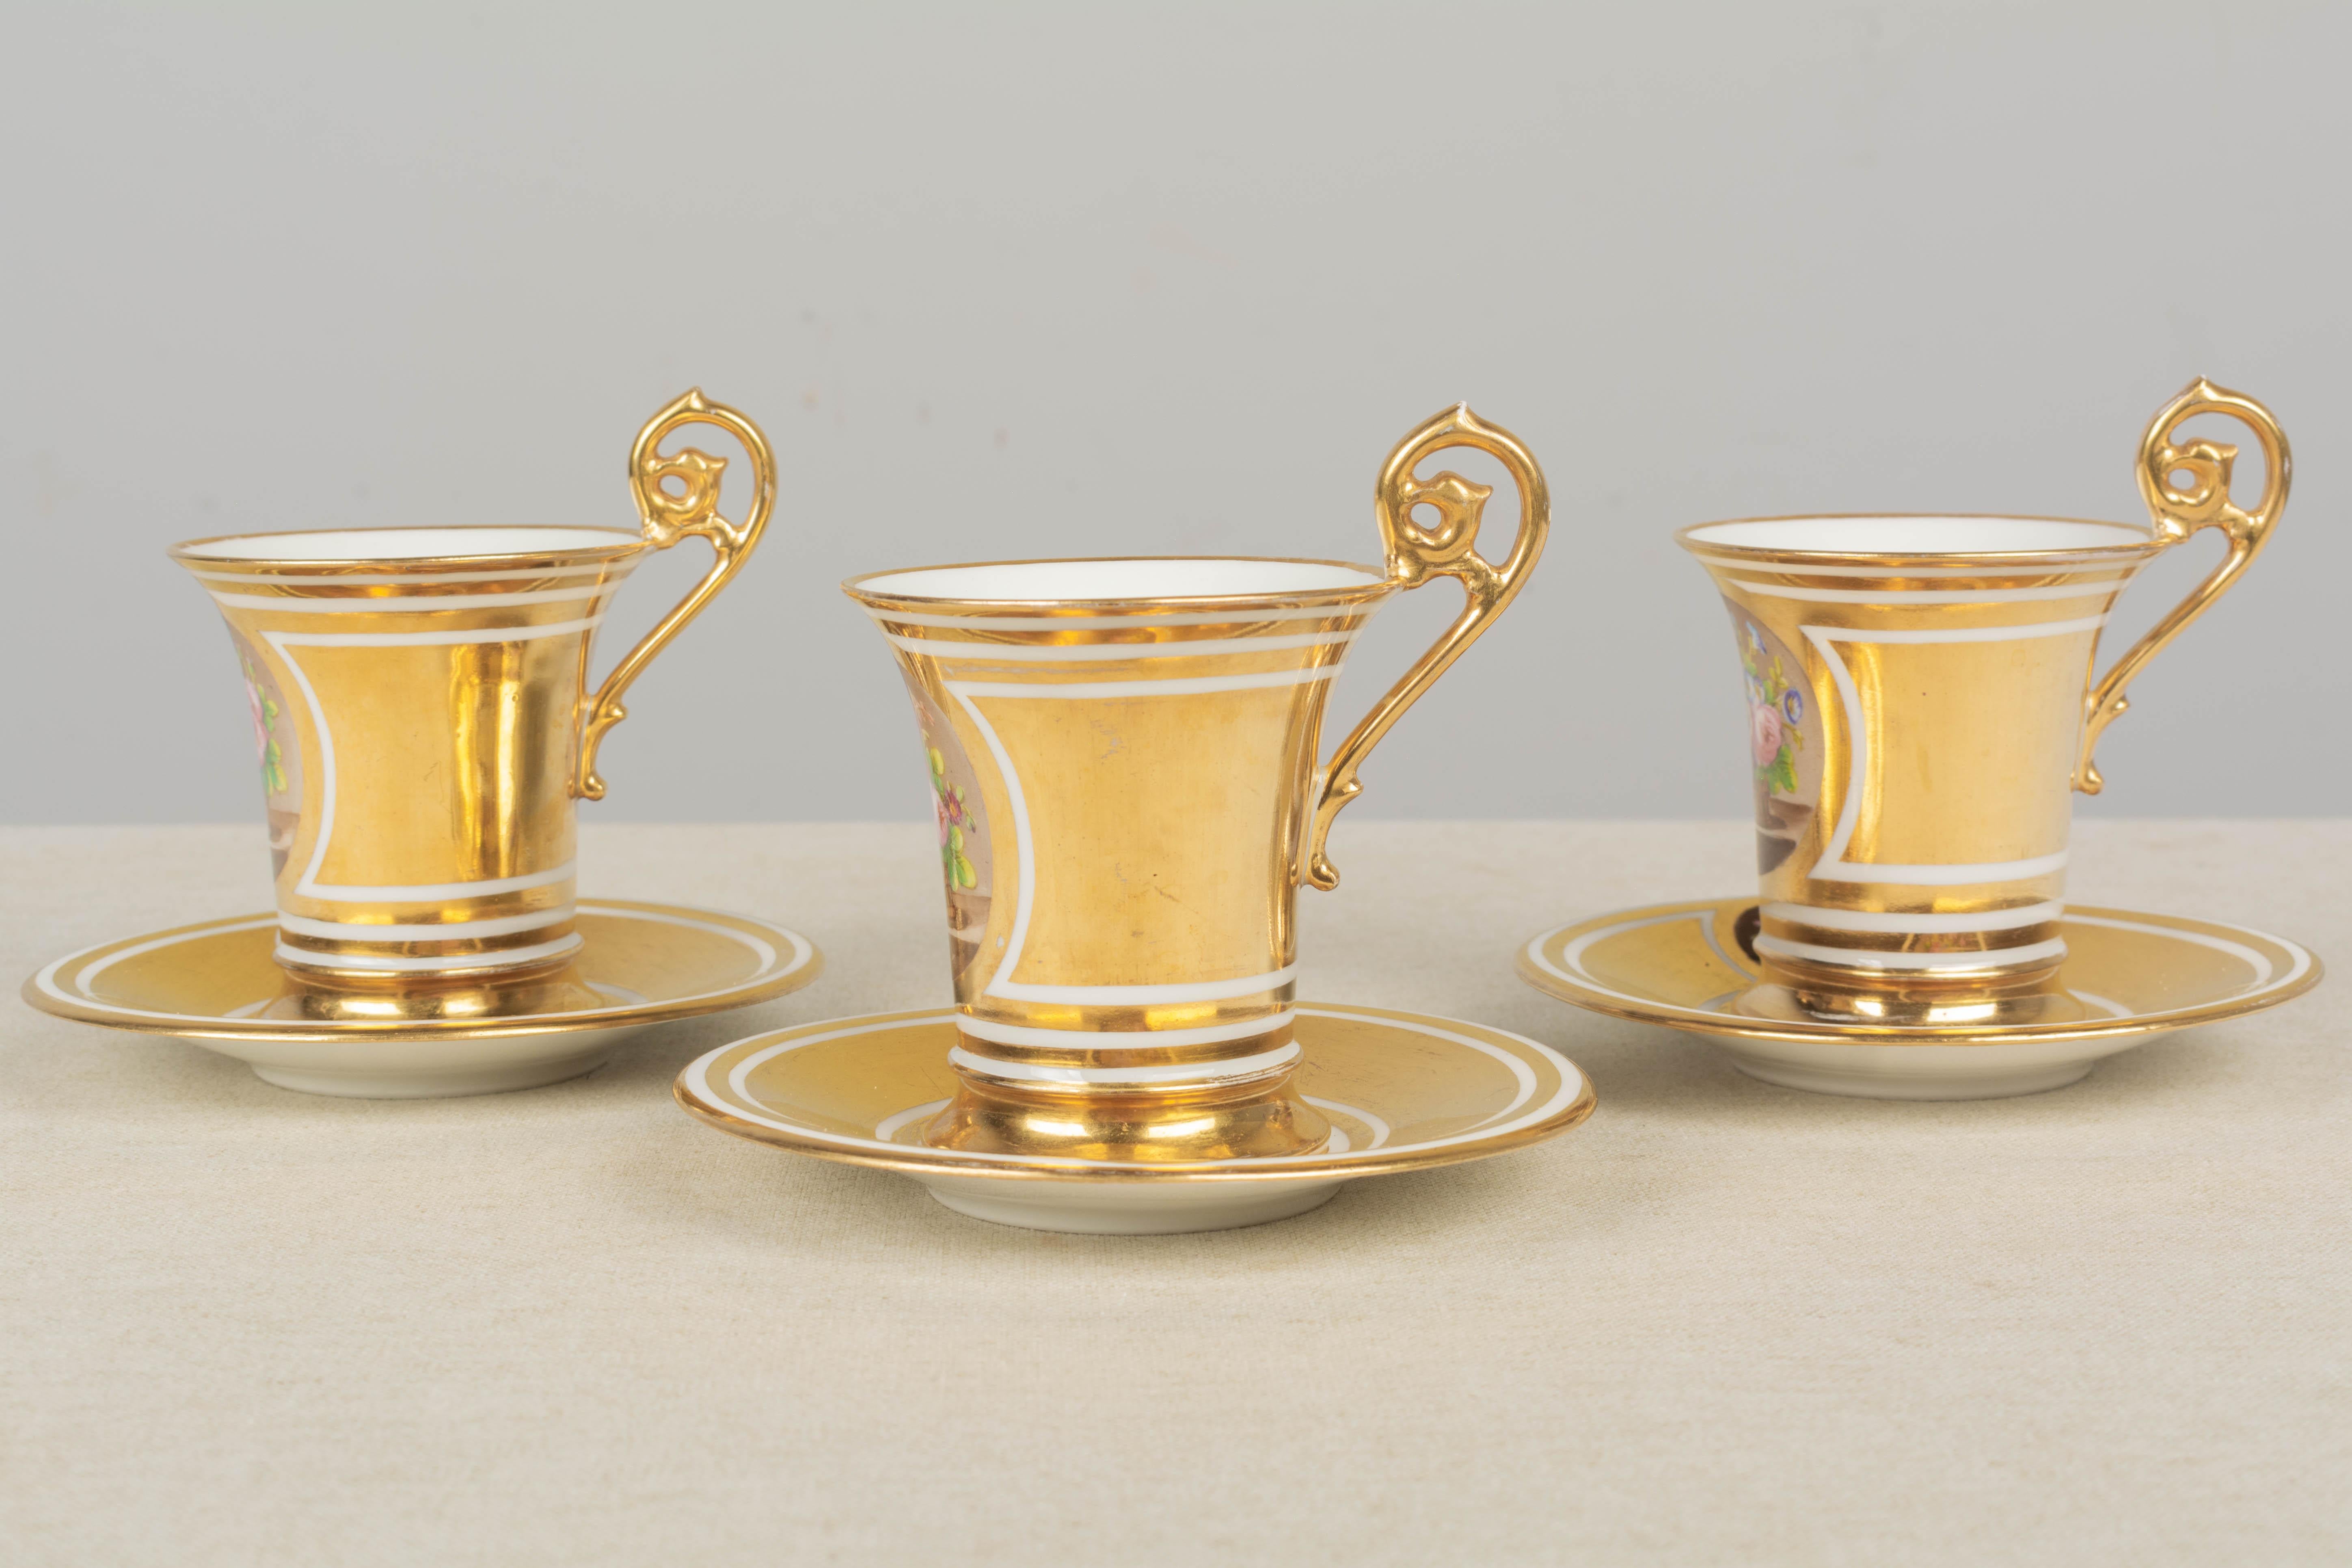 Hand-Painted 19th Century French Sèvres Gilt Porcelain Cup & Saucer, Set of 3 For Sale